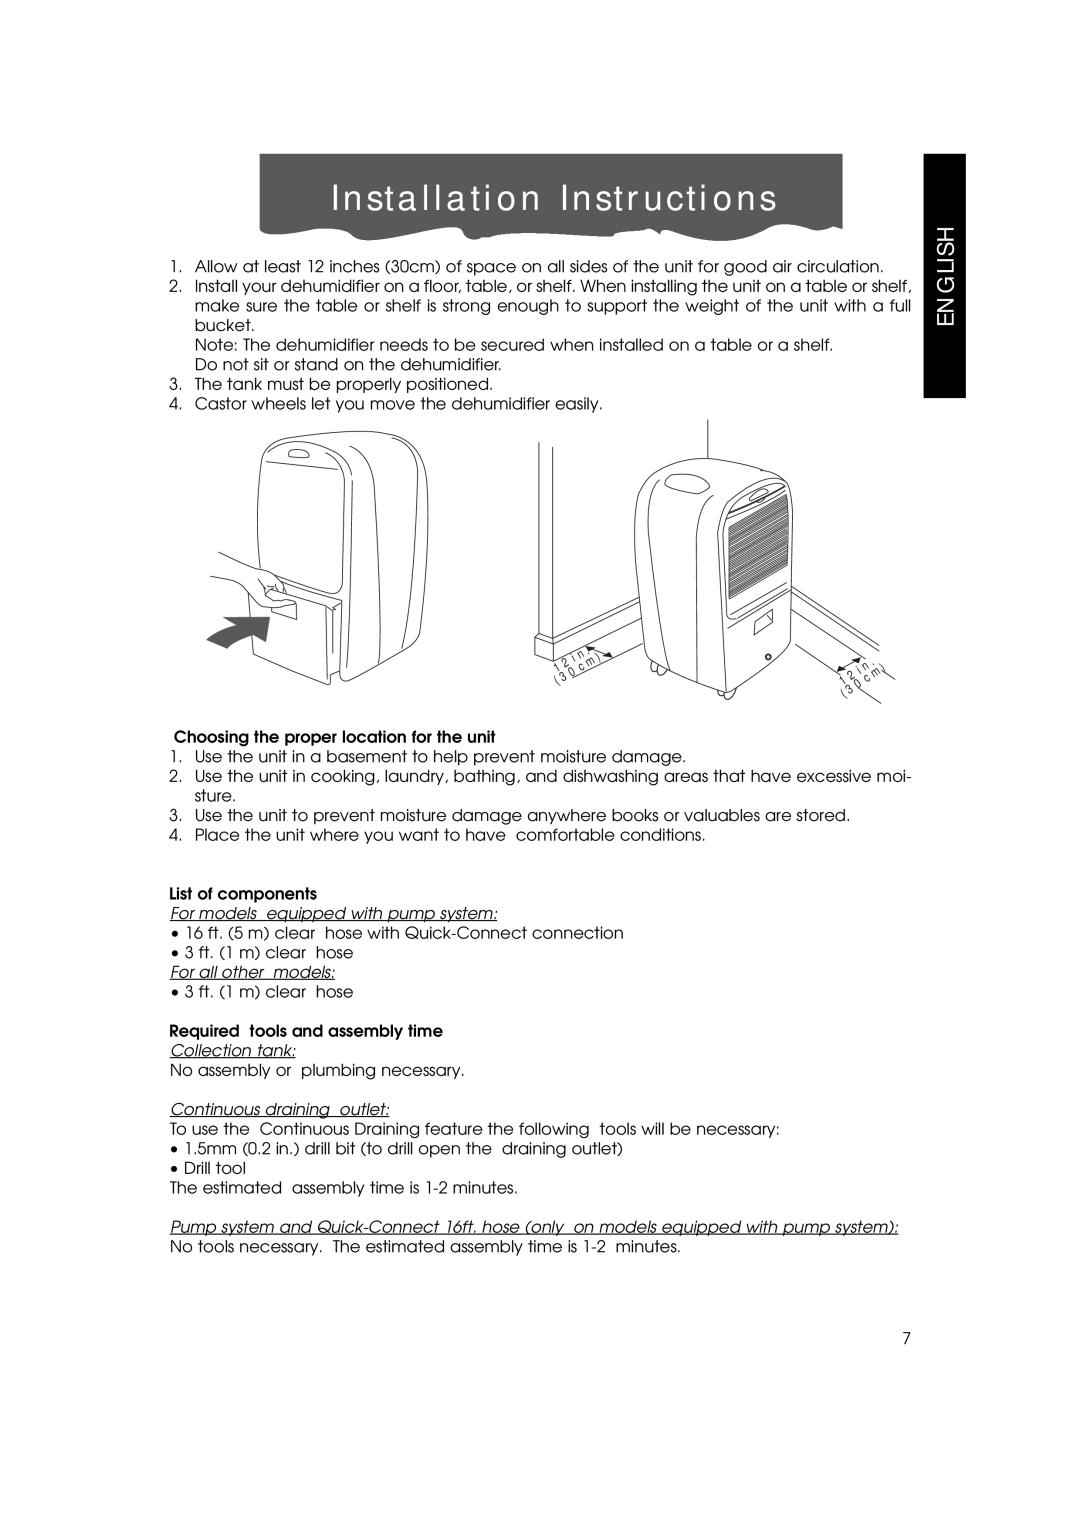 DeLonghi DH400P, DE 400P Installation Instructions, English, For models equipped with pump system, For all other models 